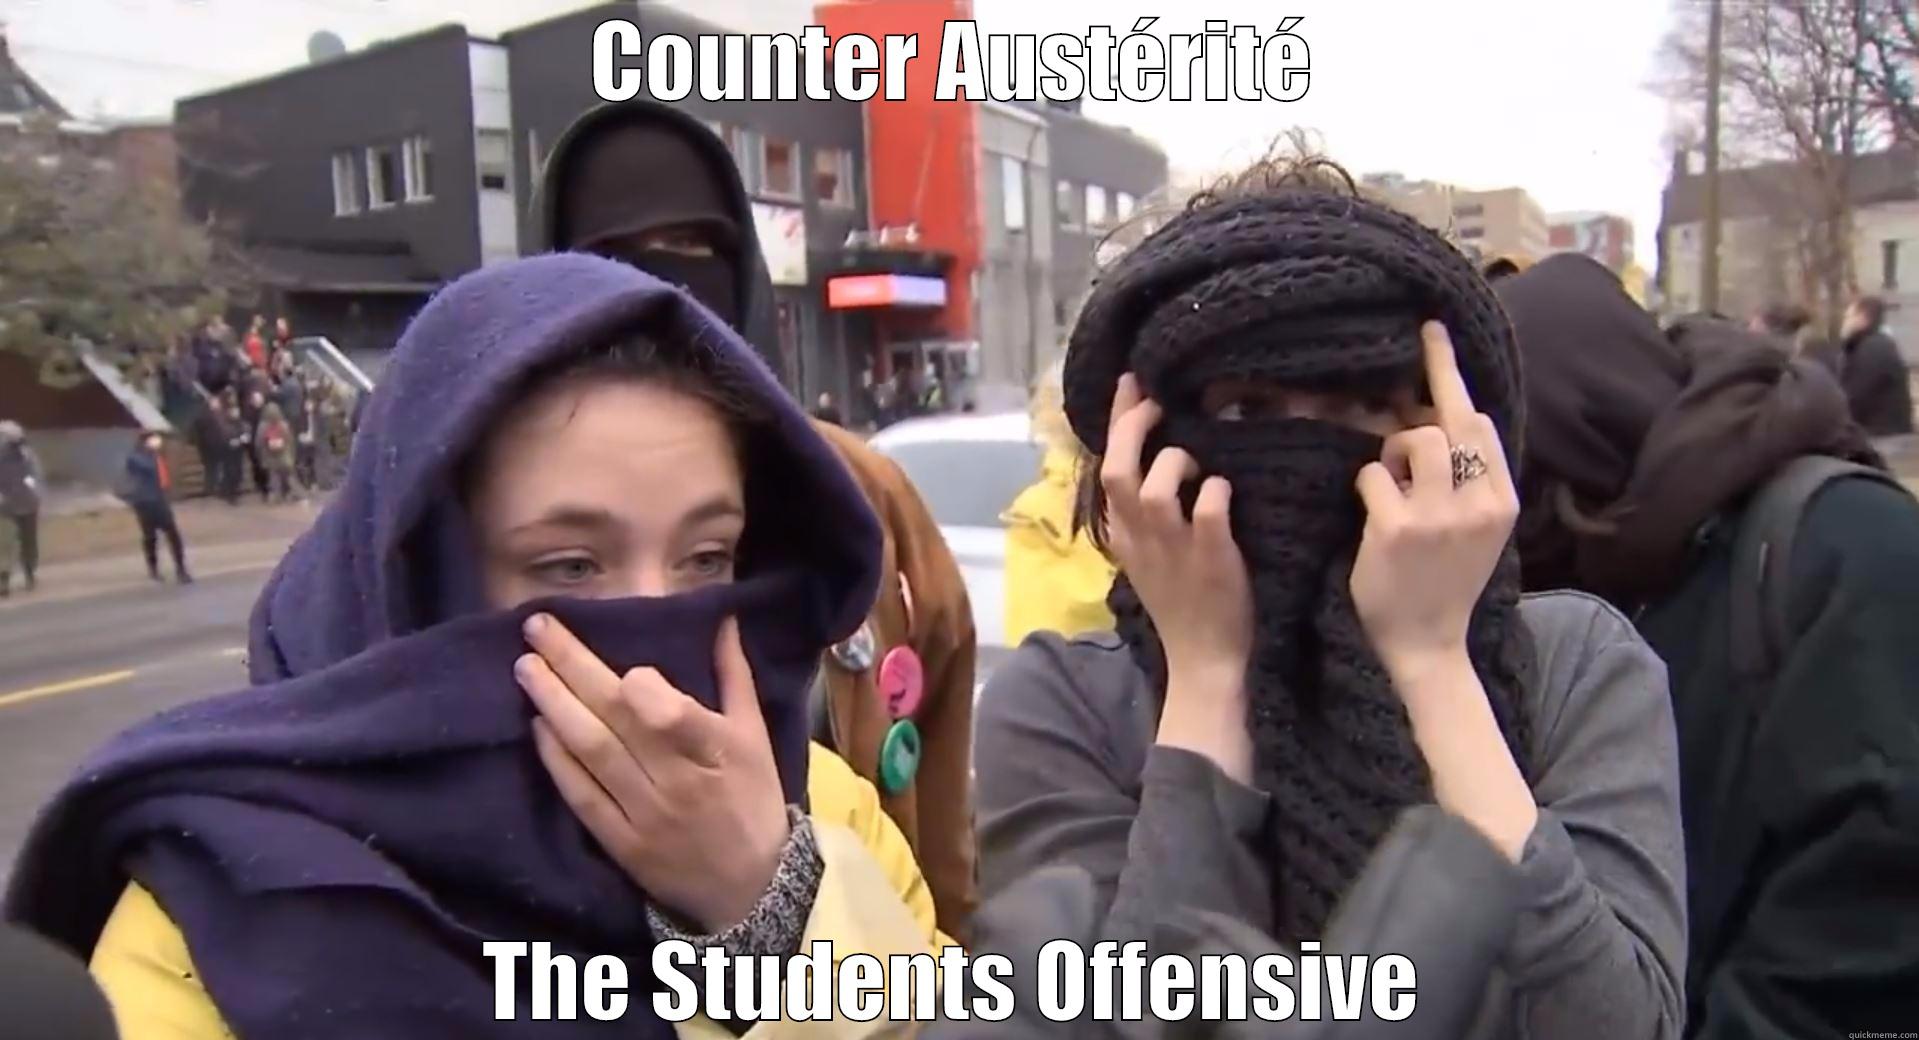 Counter Strike in QC - COUNTER AUSTÉRITÉ THE STUDENTS OFFENSIVE Misc